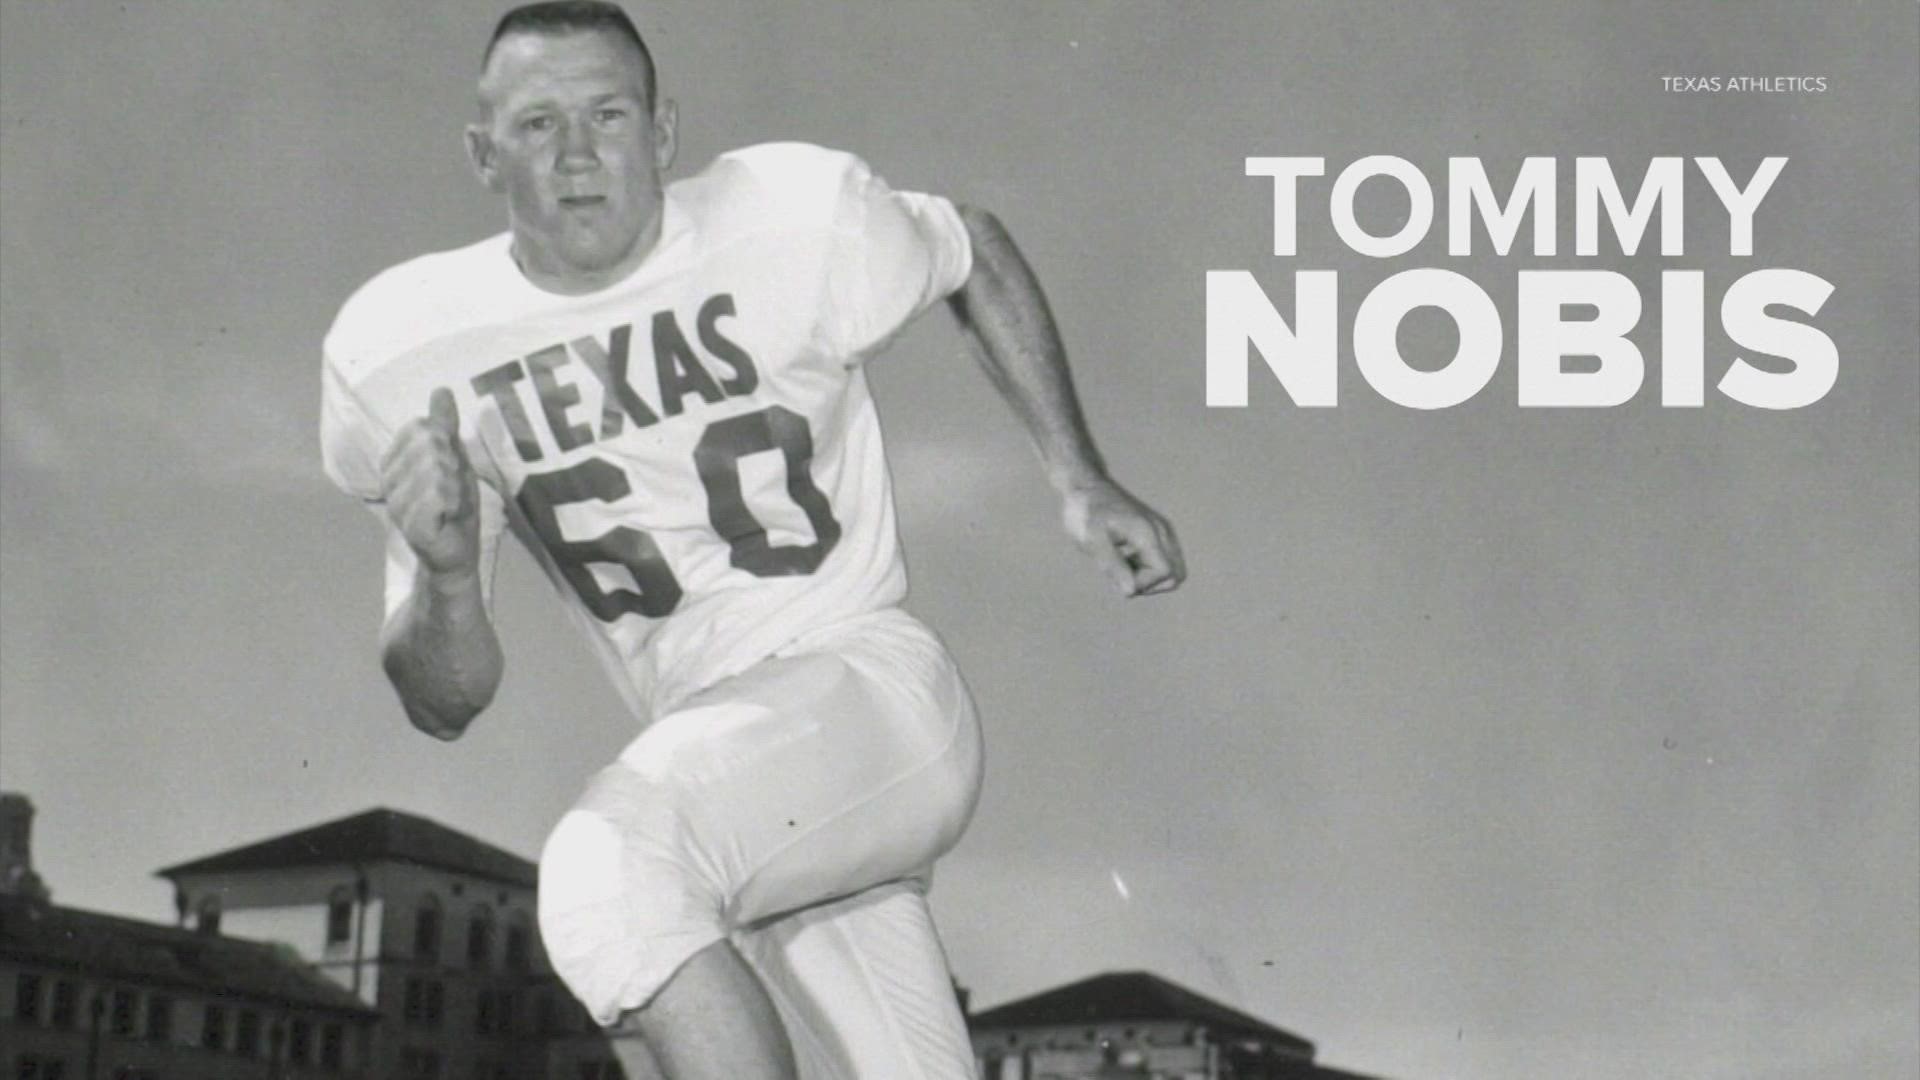 University of Texas linebacker Tommy Nobis was drafted by Atlanta in the NFL and Houston in the AFL. Houston astronaut Frank Borman tried to recruit him to Houston!